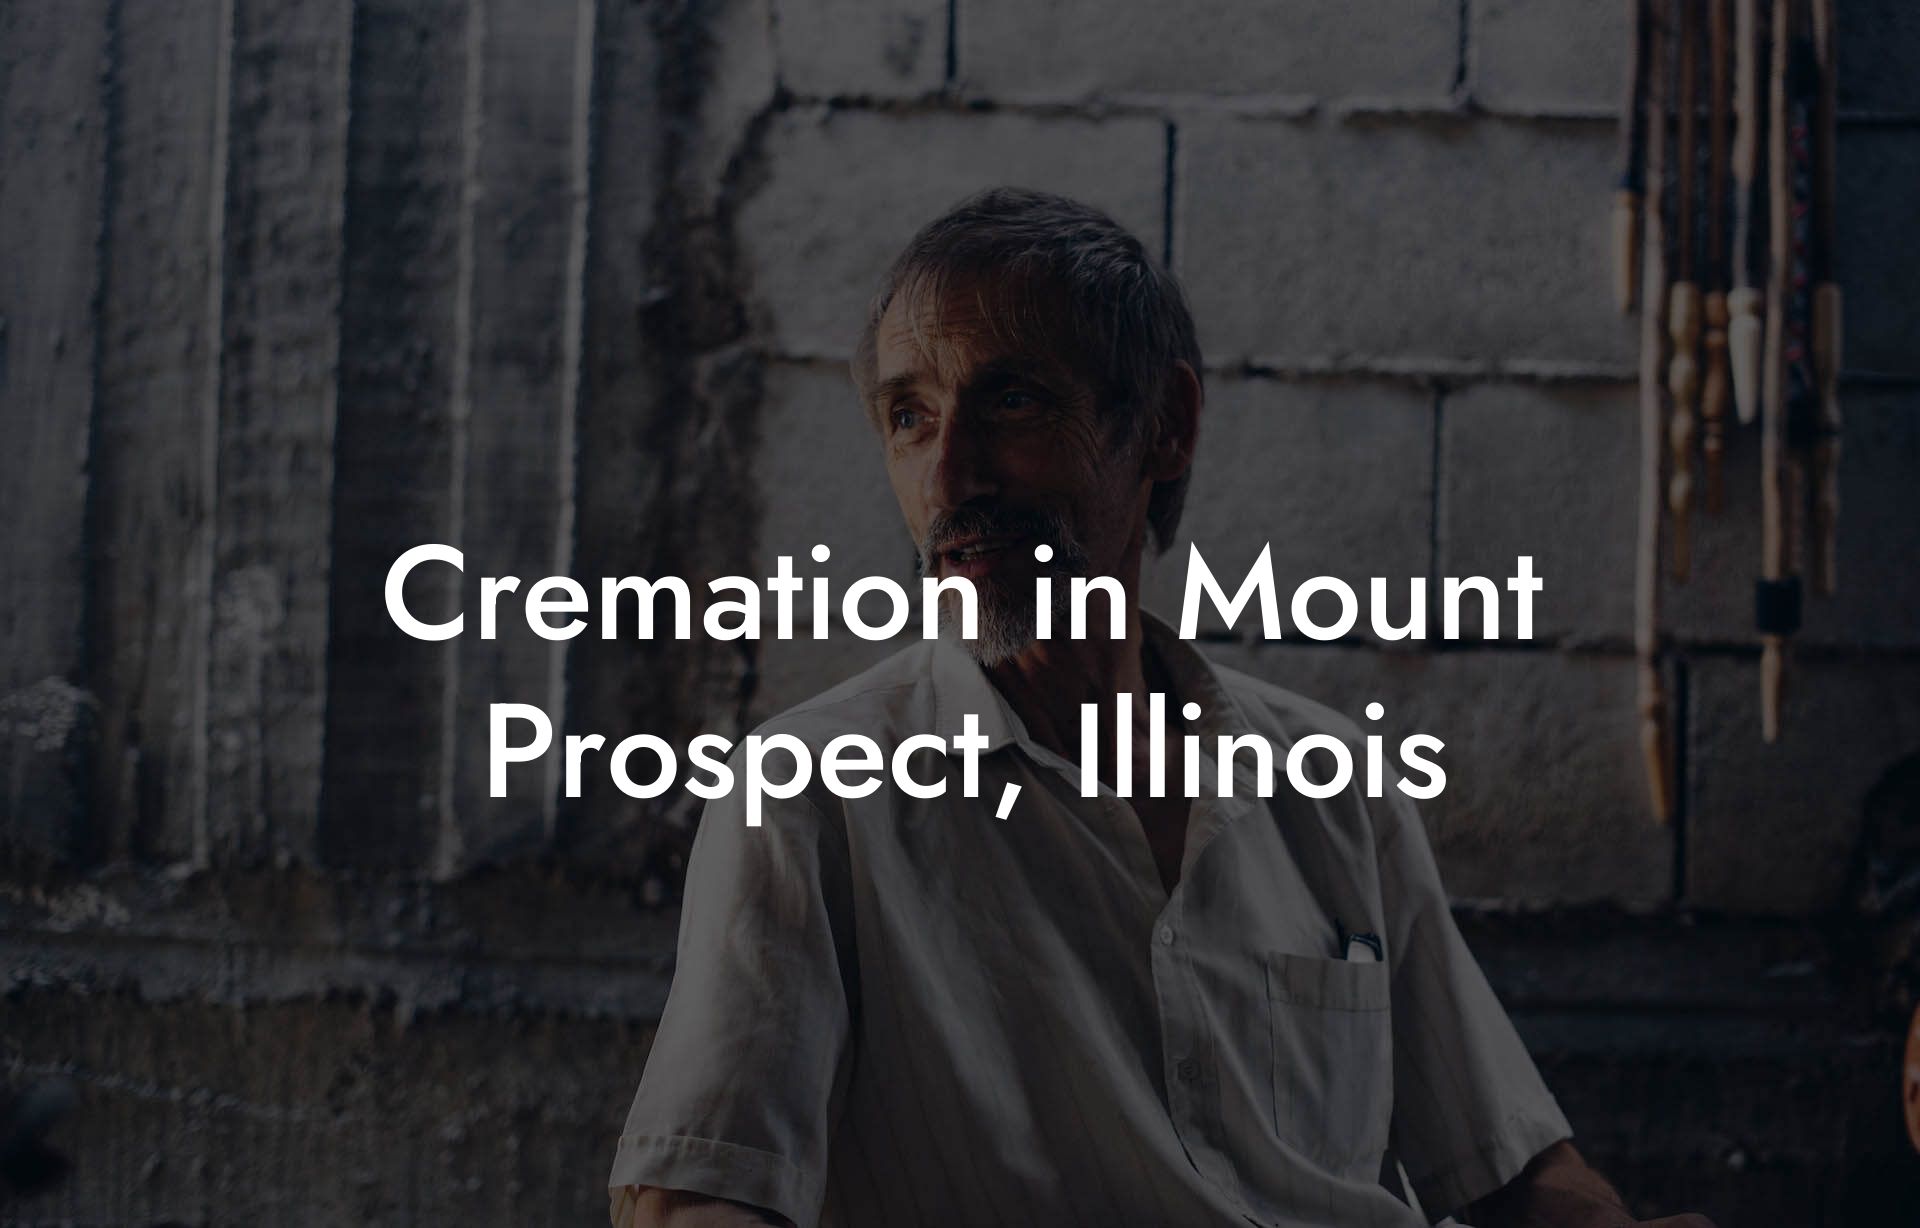 Cremation in Mount Prospect, Illinois